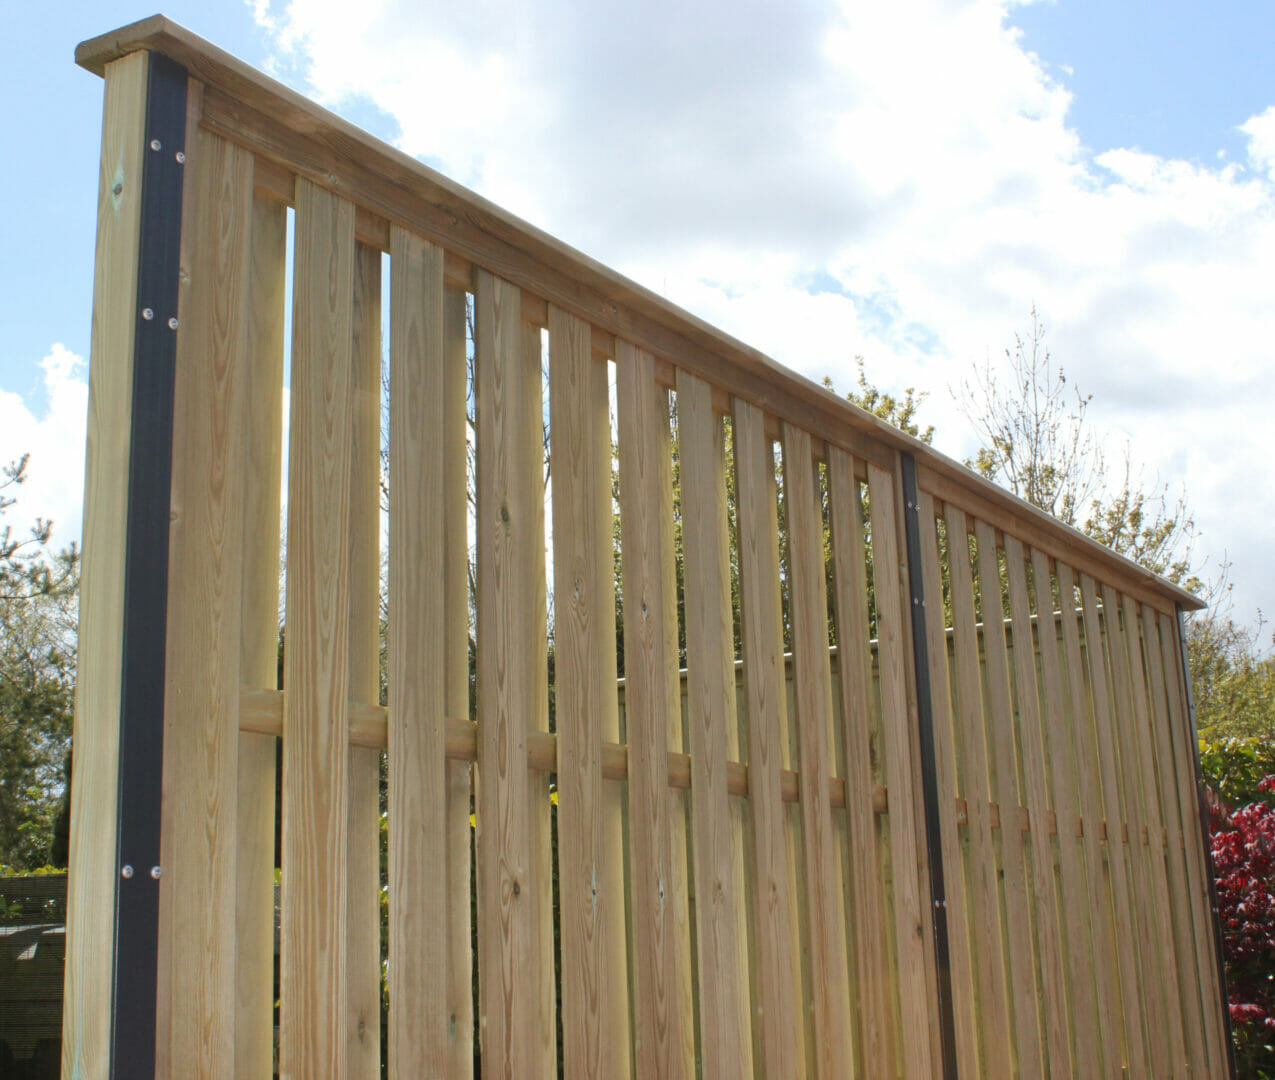 Small but mighty – T-shaped steel posts from Jacksons Fencing @Jacksonsfencing